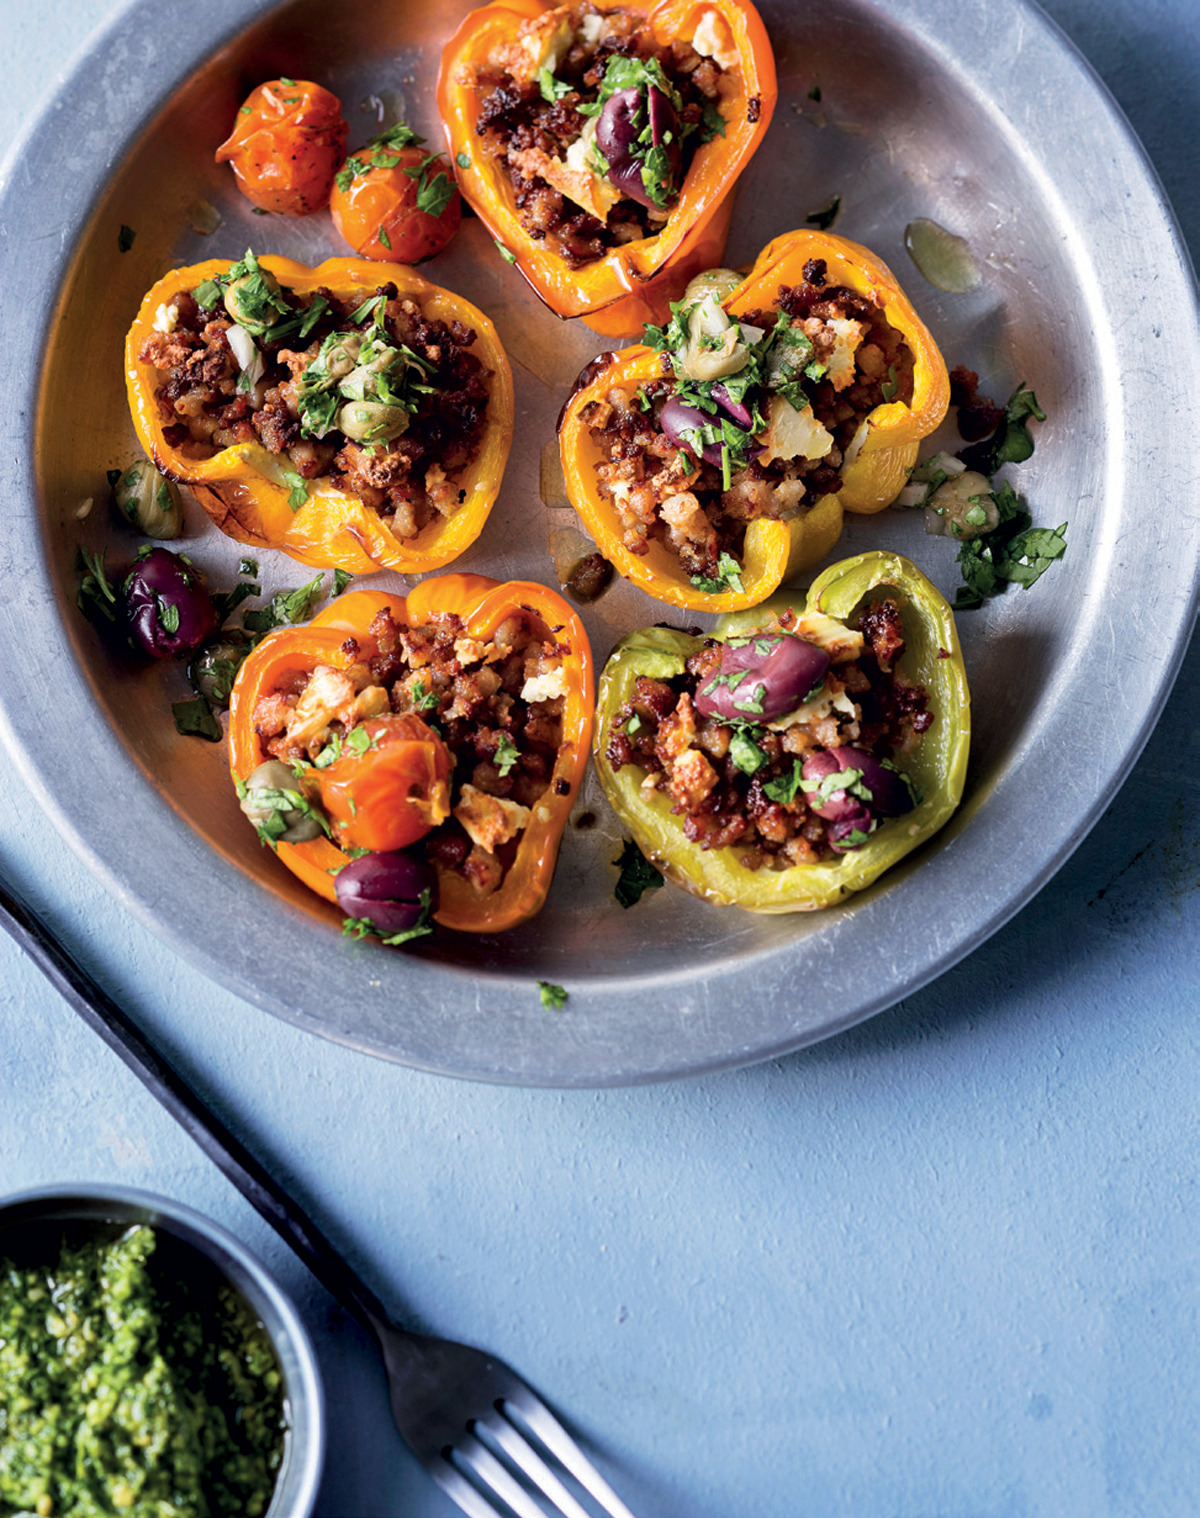 Peppers stuffed with Italian-style pork mince recipe